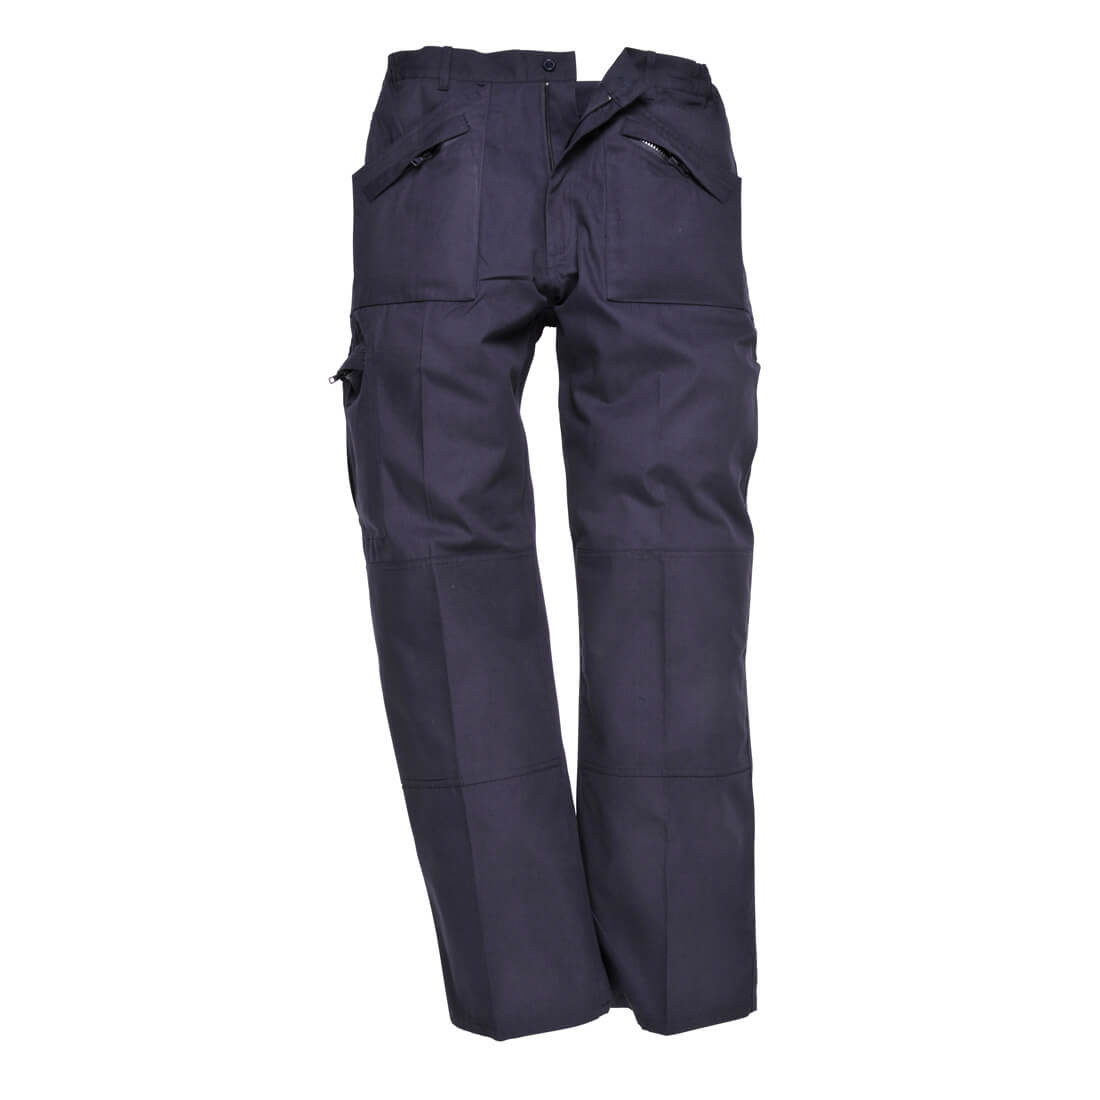 Classic Action Trousers - Texpel Finish - Safetywear